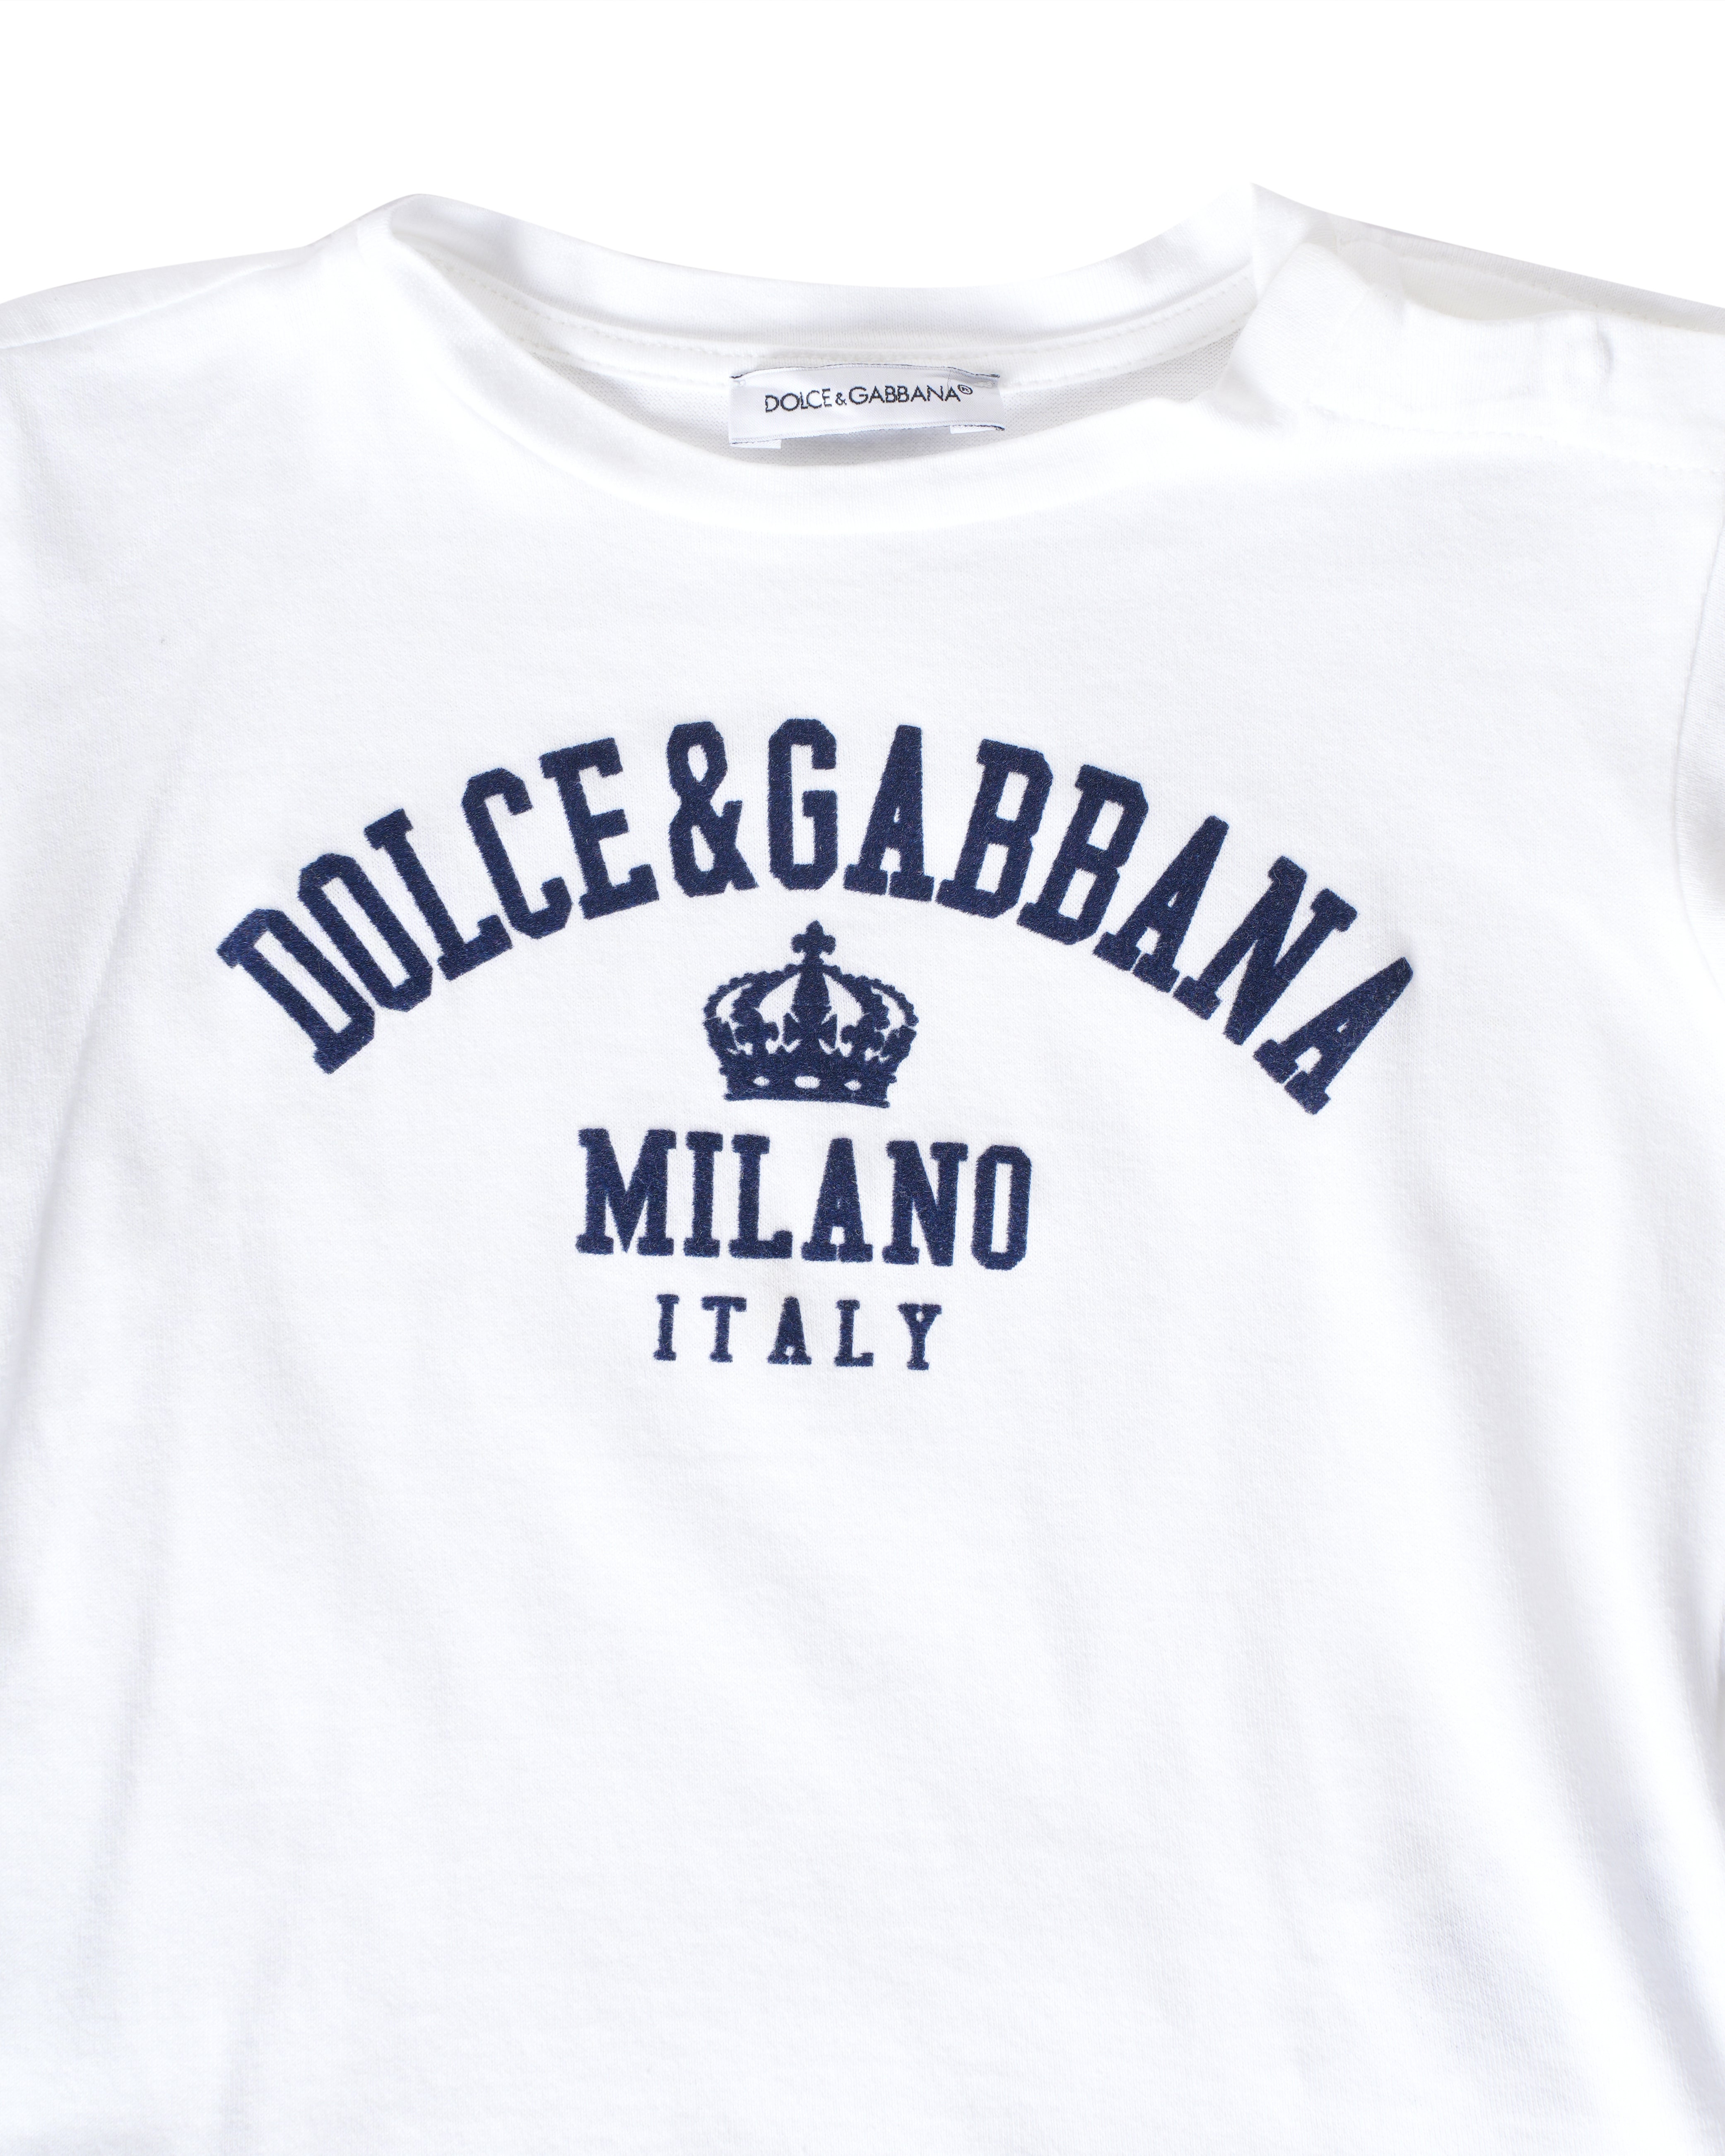 Dolce & Gabbana White T-Shirt With Brand Name On Front